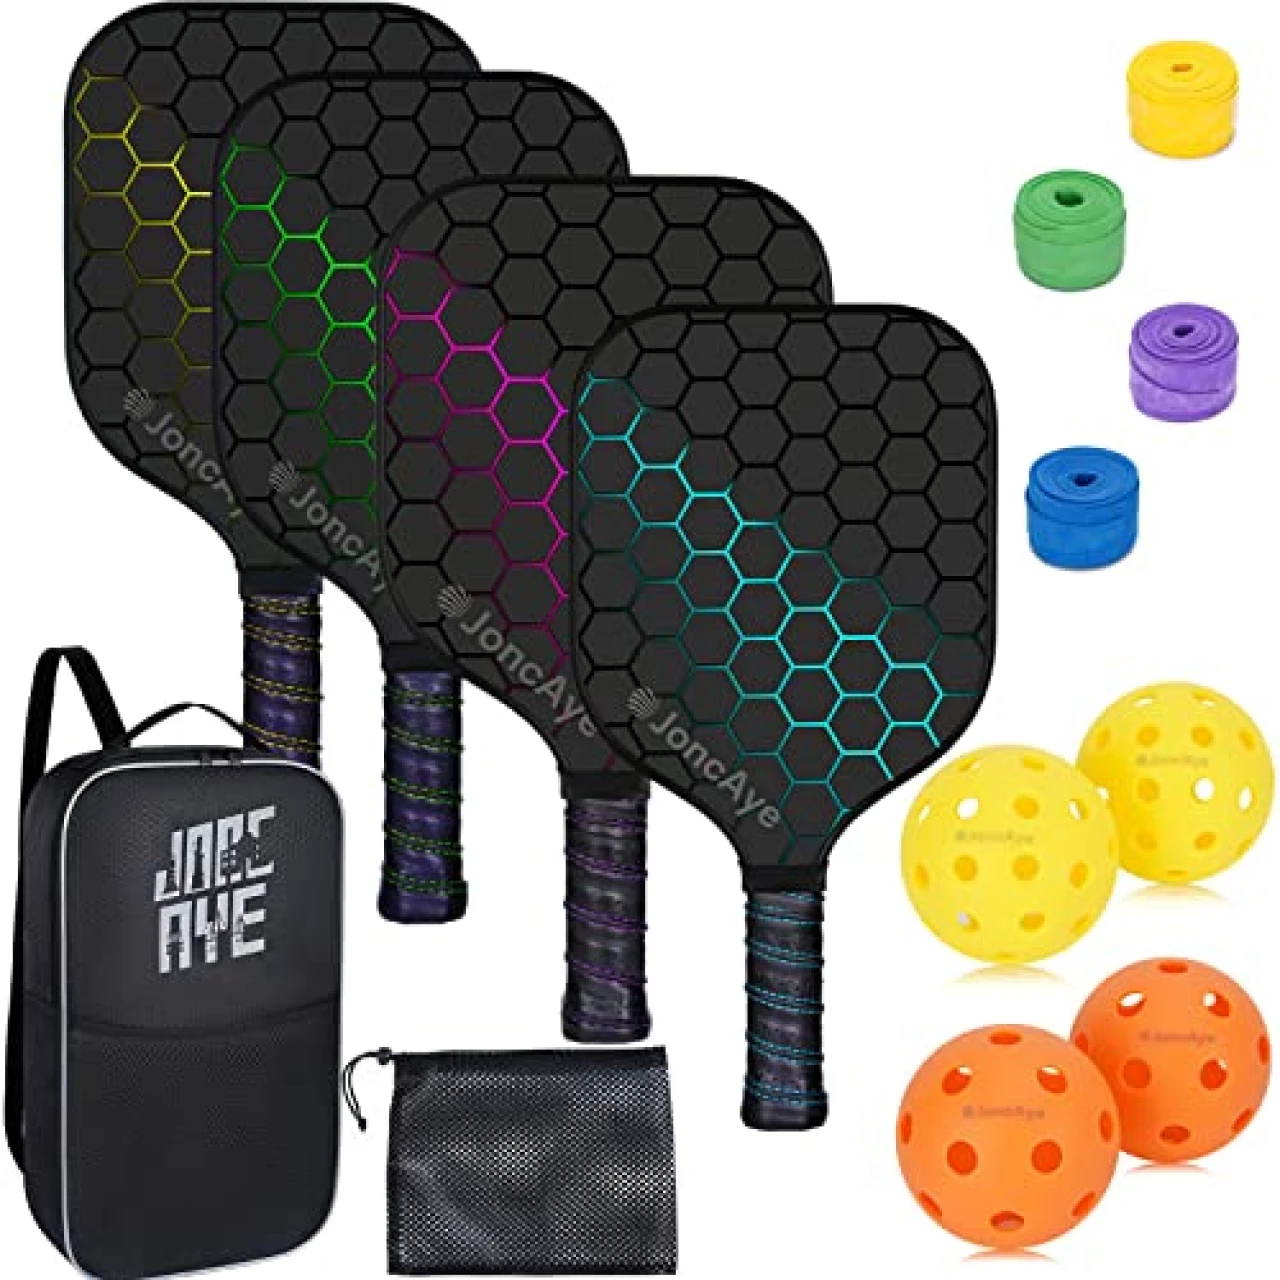 Pickleball Paddles Set of 4 incl 4 Fiberglass Pickleball Rackets, 4 Balls, 1 Paddle Bag, 4 Grip Tapes, JoncAye Pickleball Set for Outdoor and Indoor, Pickleball-Paddle-Set of 4 with Accessories